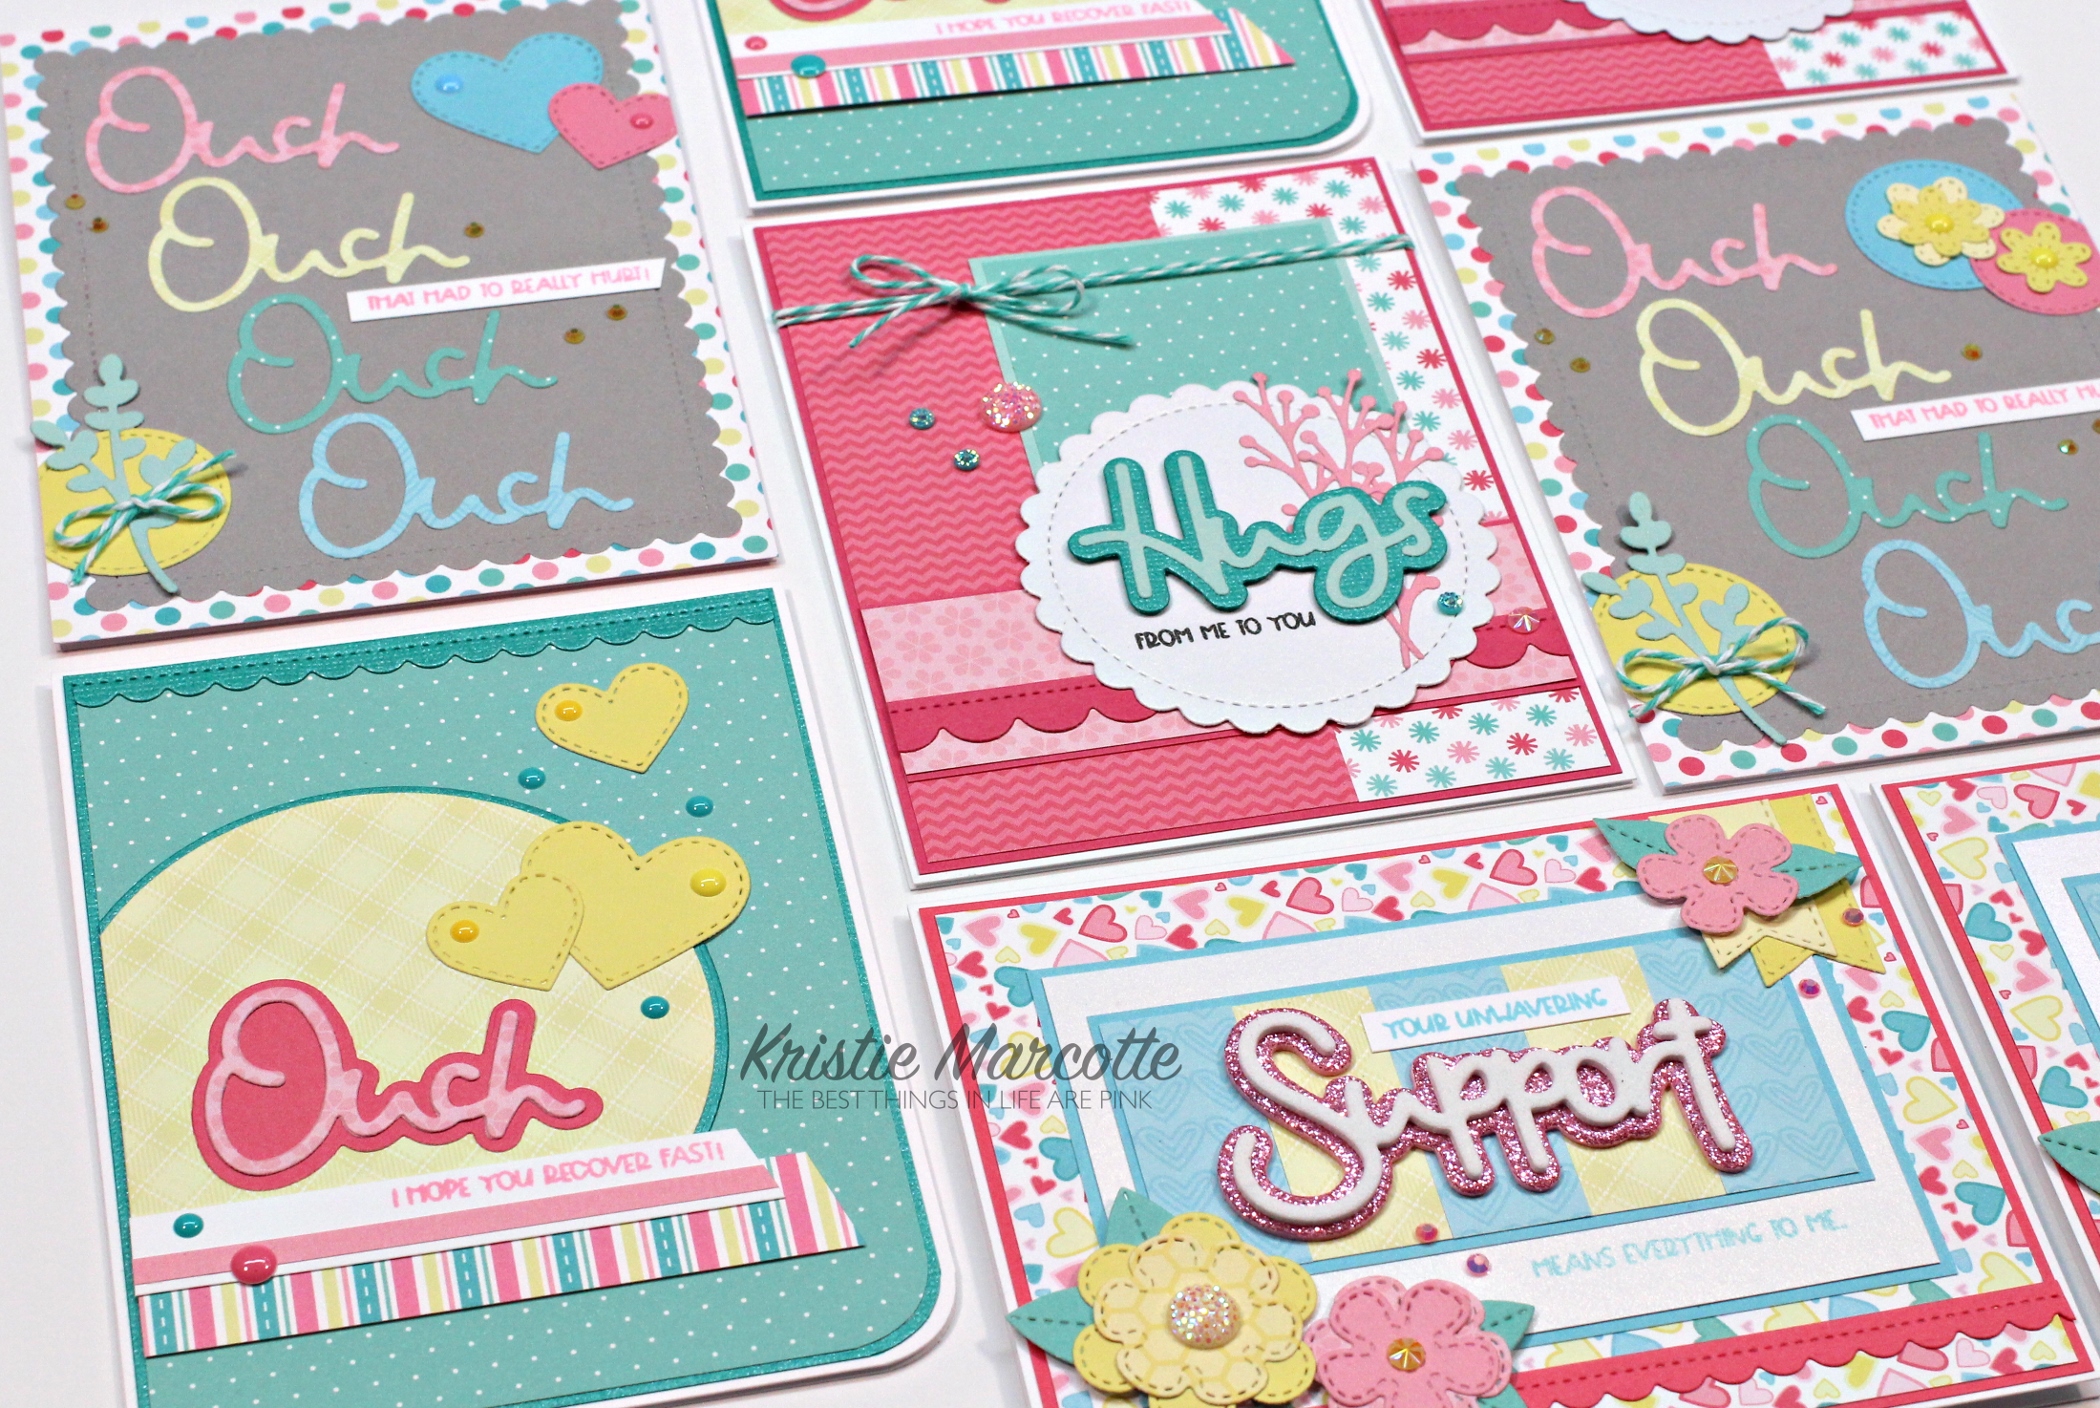 Queen & Company – Support Sentiment Stacker – 8 cards 1 kit